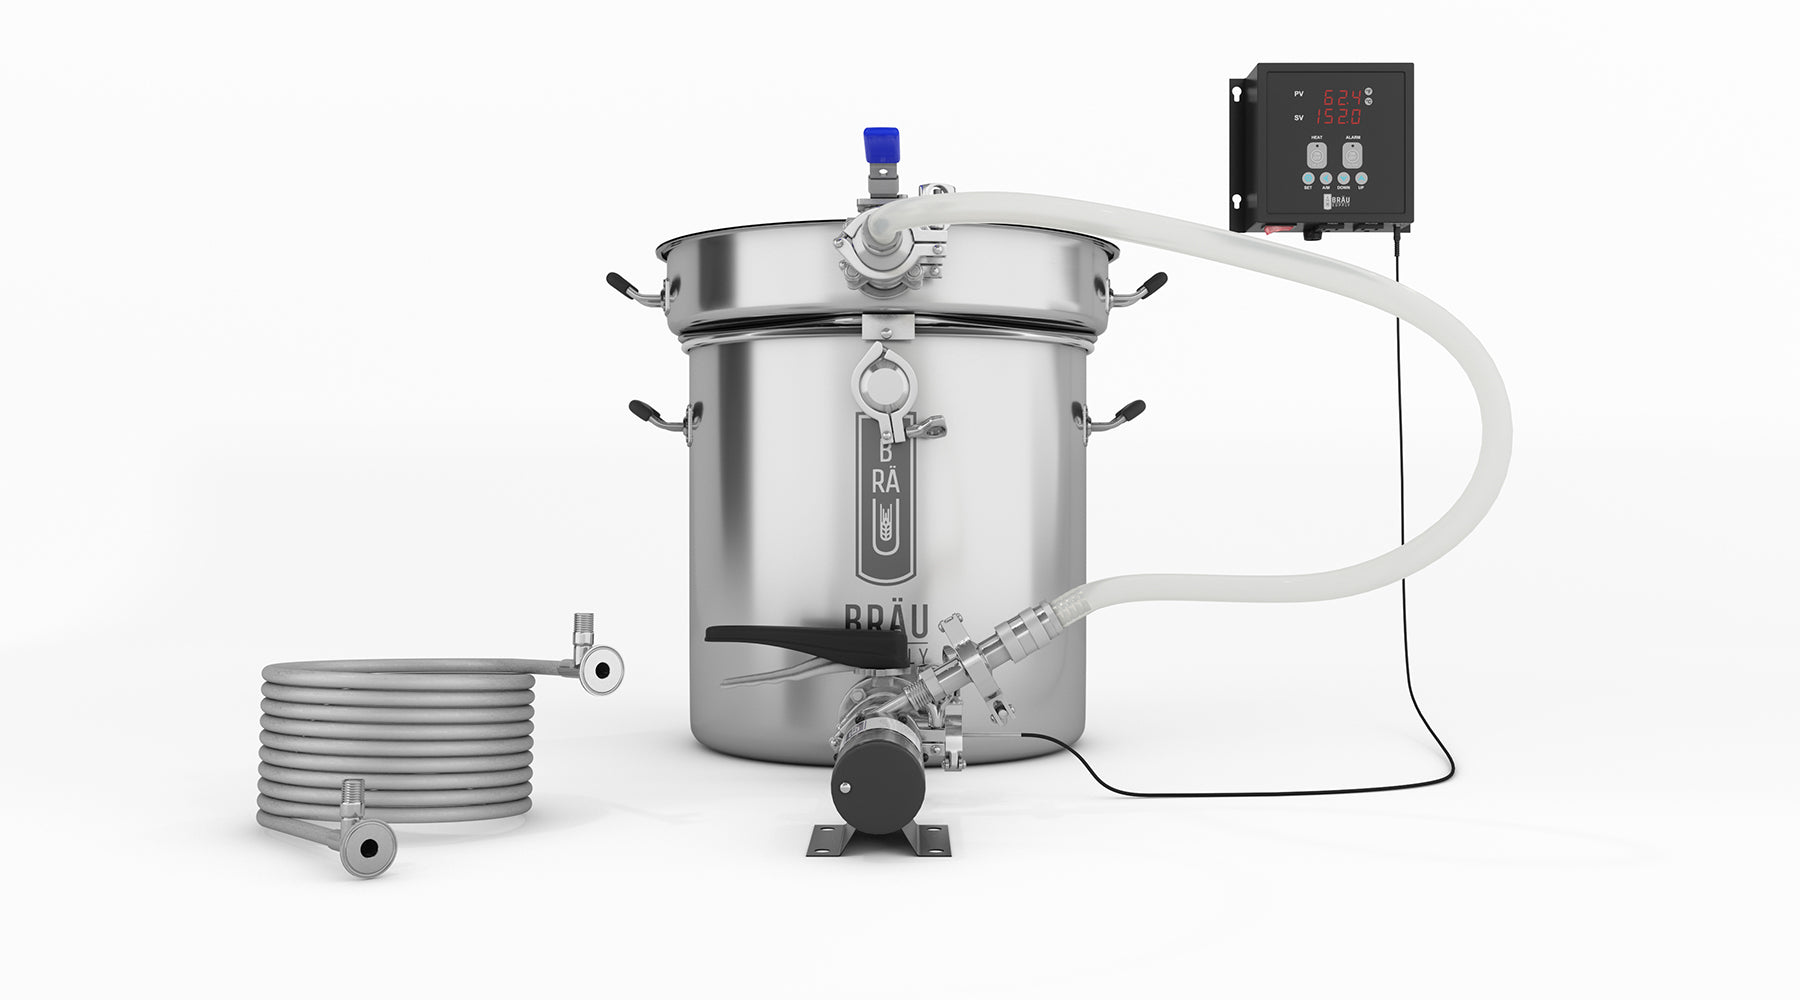 Unibräu all-in-one countertop electric brew system